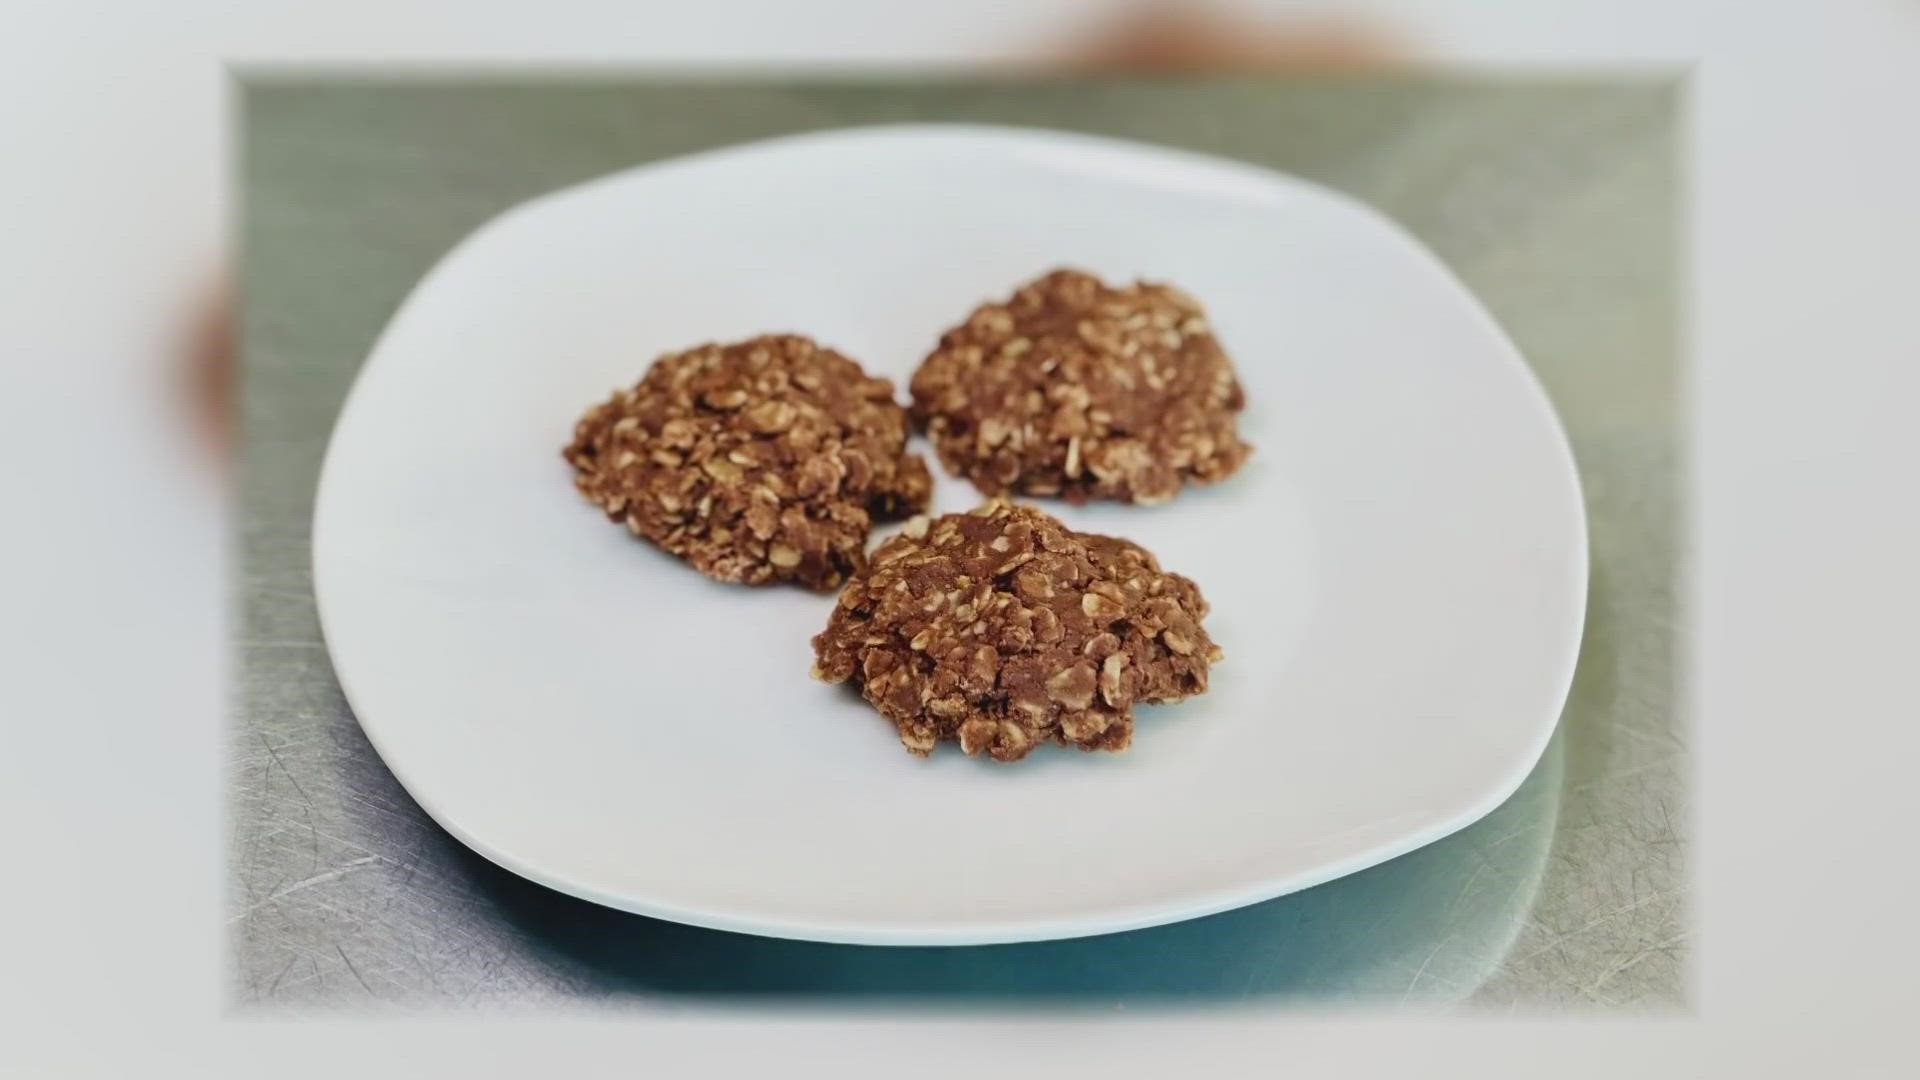 Follow along as 10TV's Brittany Bailey puts a twist on the traditional no-bake cookie!